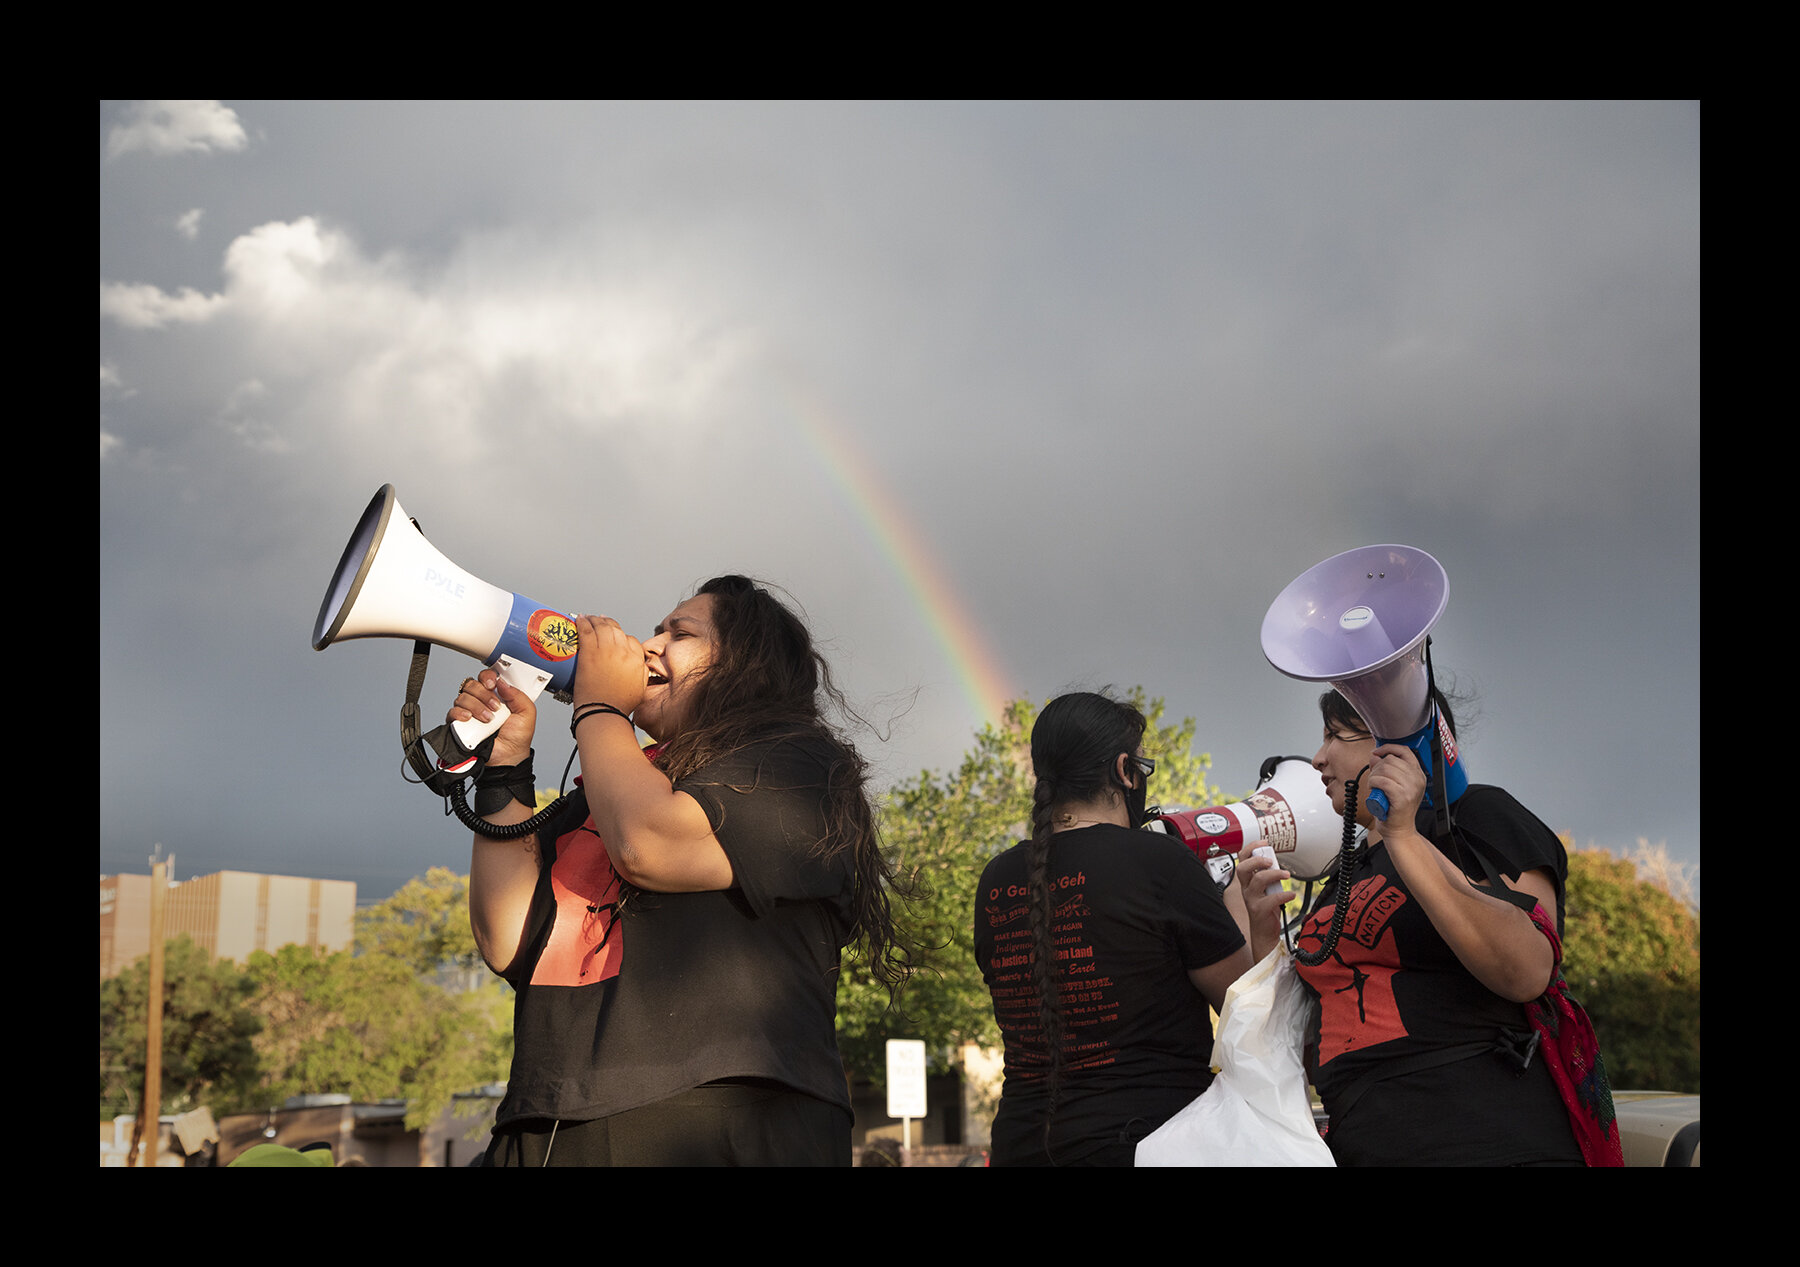  Hundreds peacefully demonstrated through a rainstorm in Albuquerque against President Trump’s plan to send federal officers to New Mexico’s largest city.  